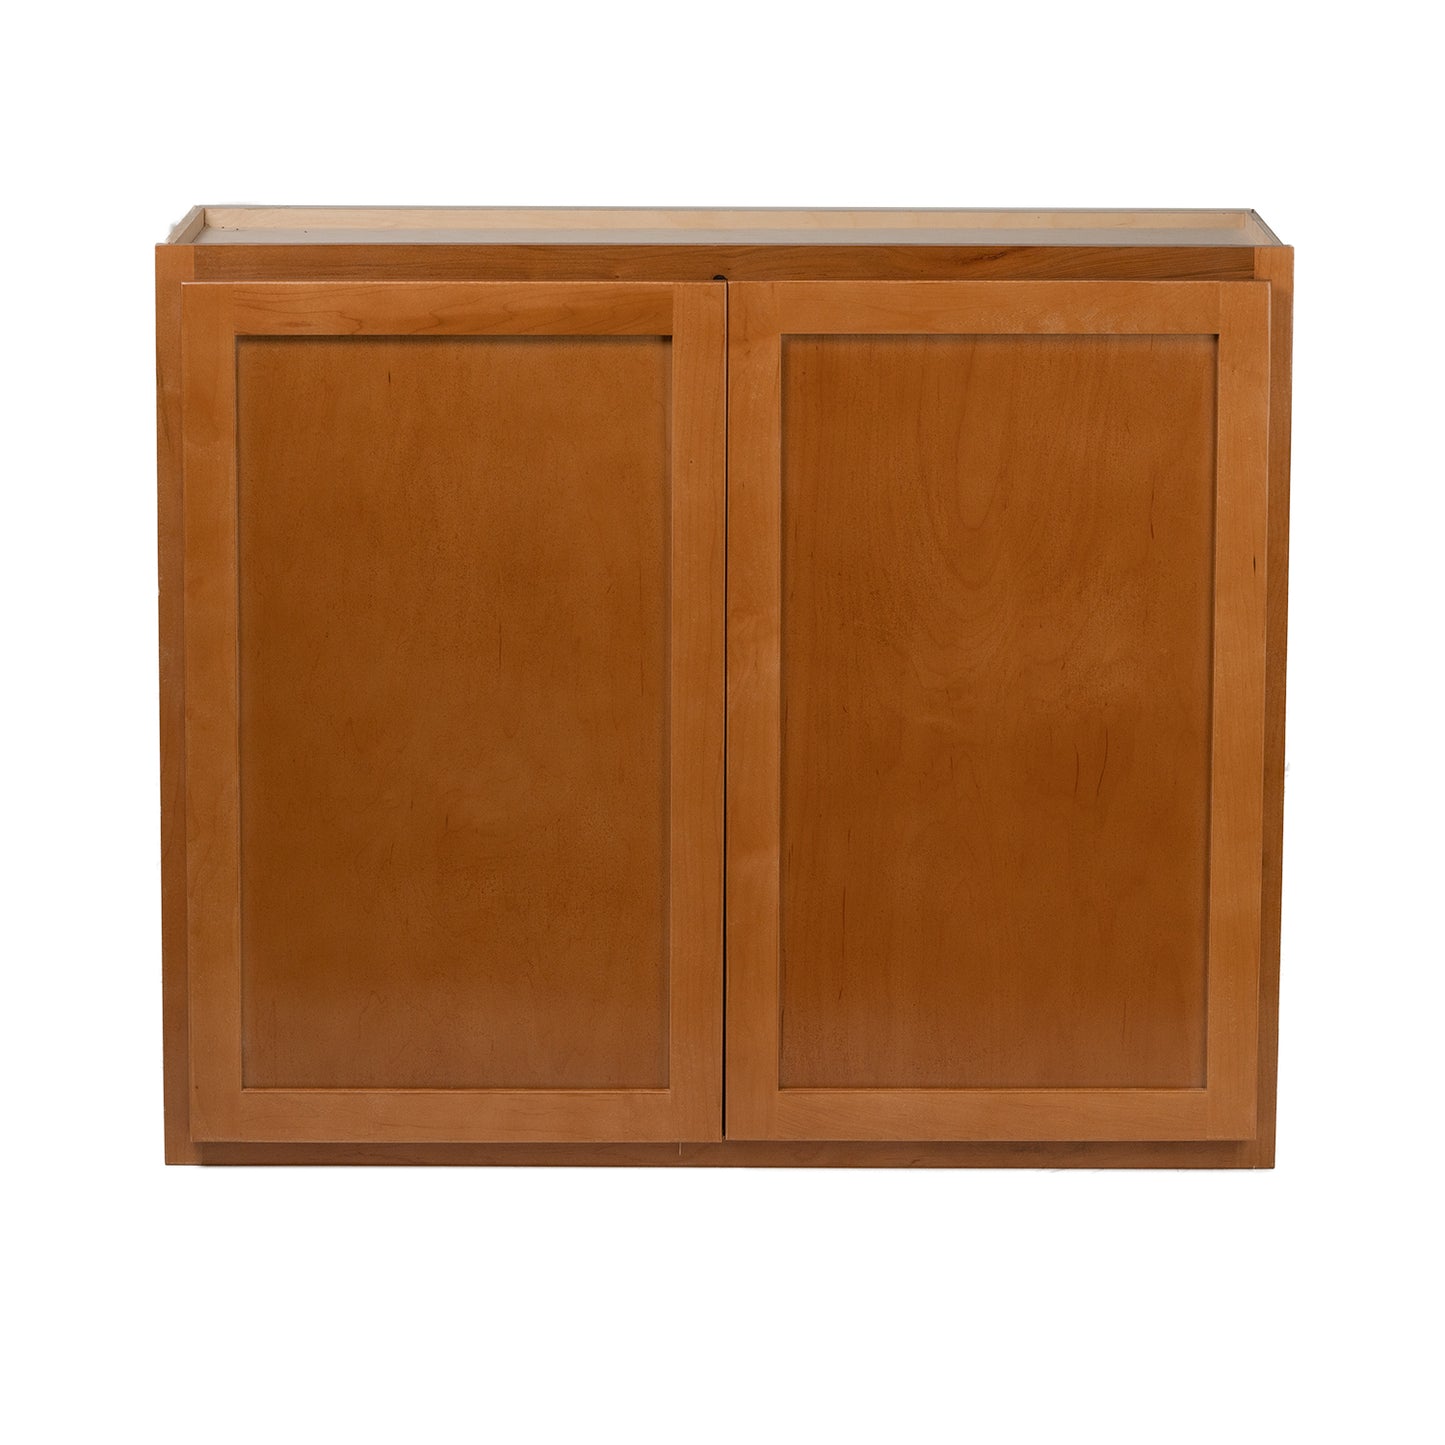 Quicklock RTA (Ready-to-Assemble) Provincial Stain 30"Wx36"Hx12"D Wall Cabinet